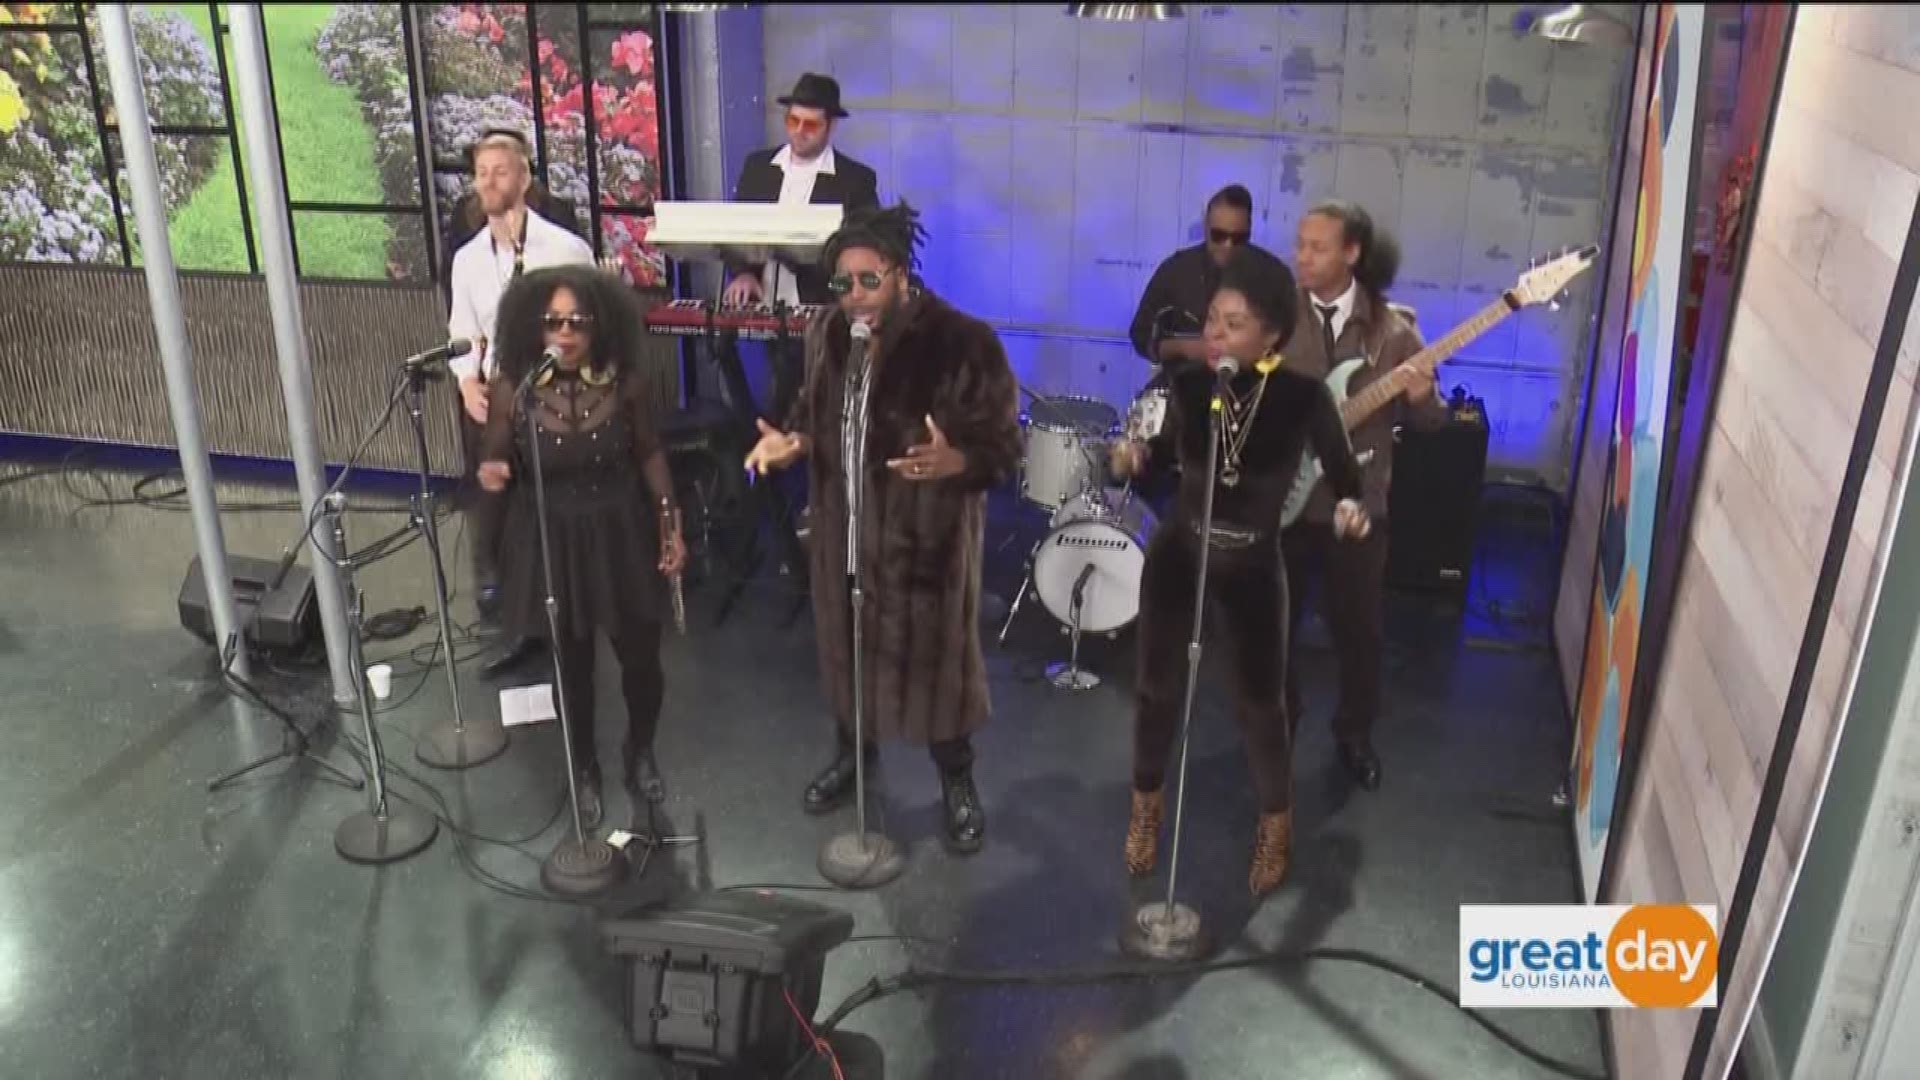 Water Seed performs on Great Day Louisiana. You can find out more by visiting their website www.WaterSeedMusic.com